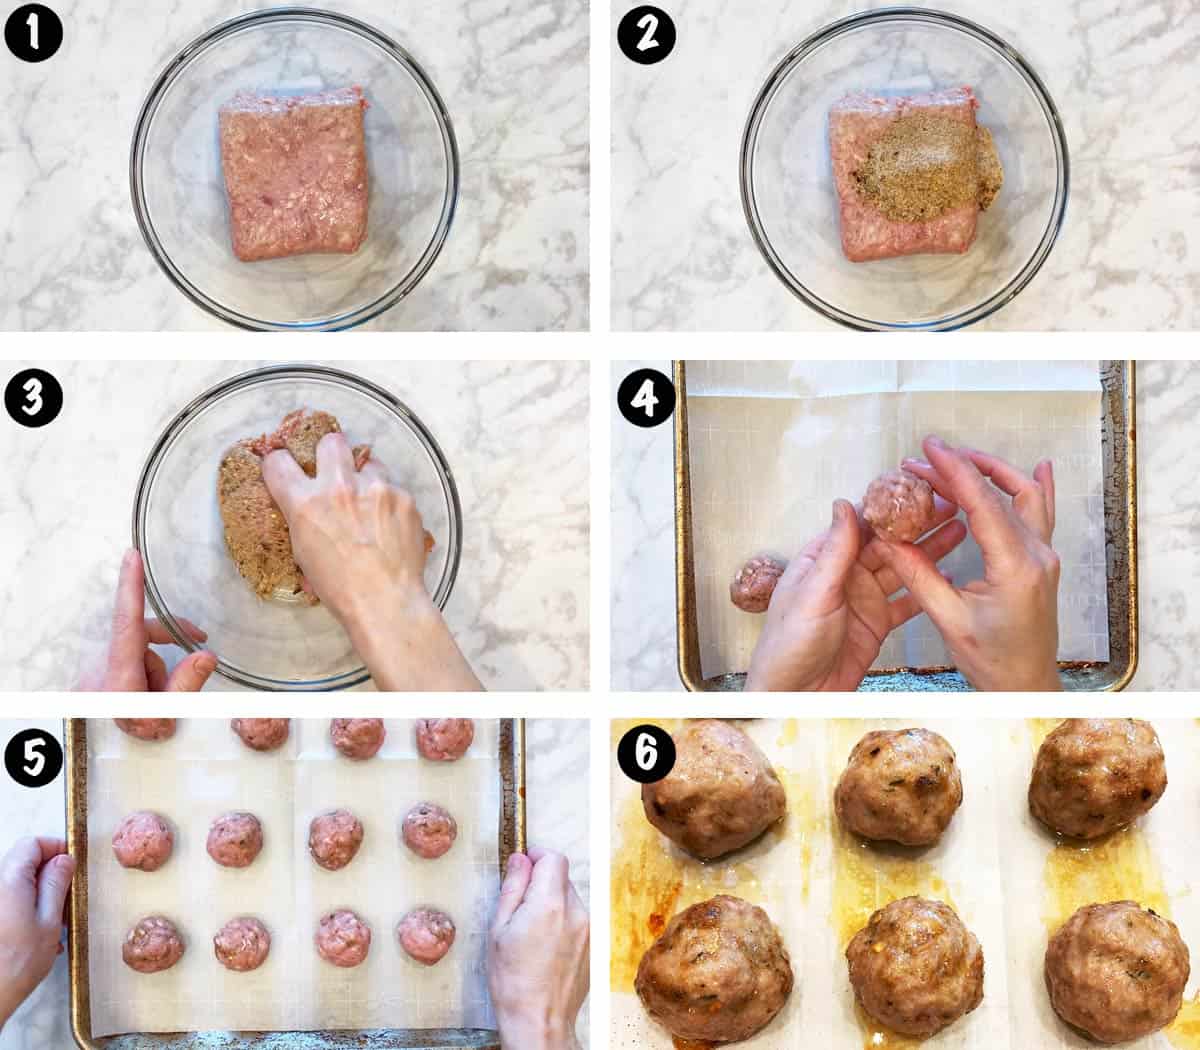 A six-photo collage showing the steps for making pork meatballs. 